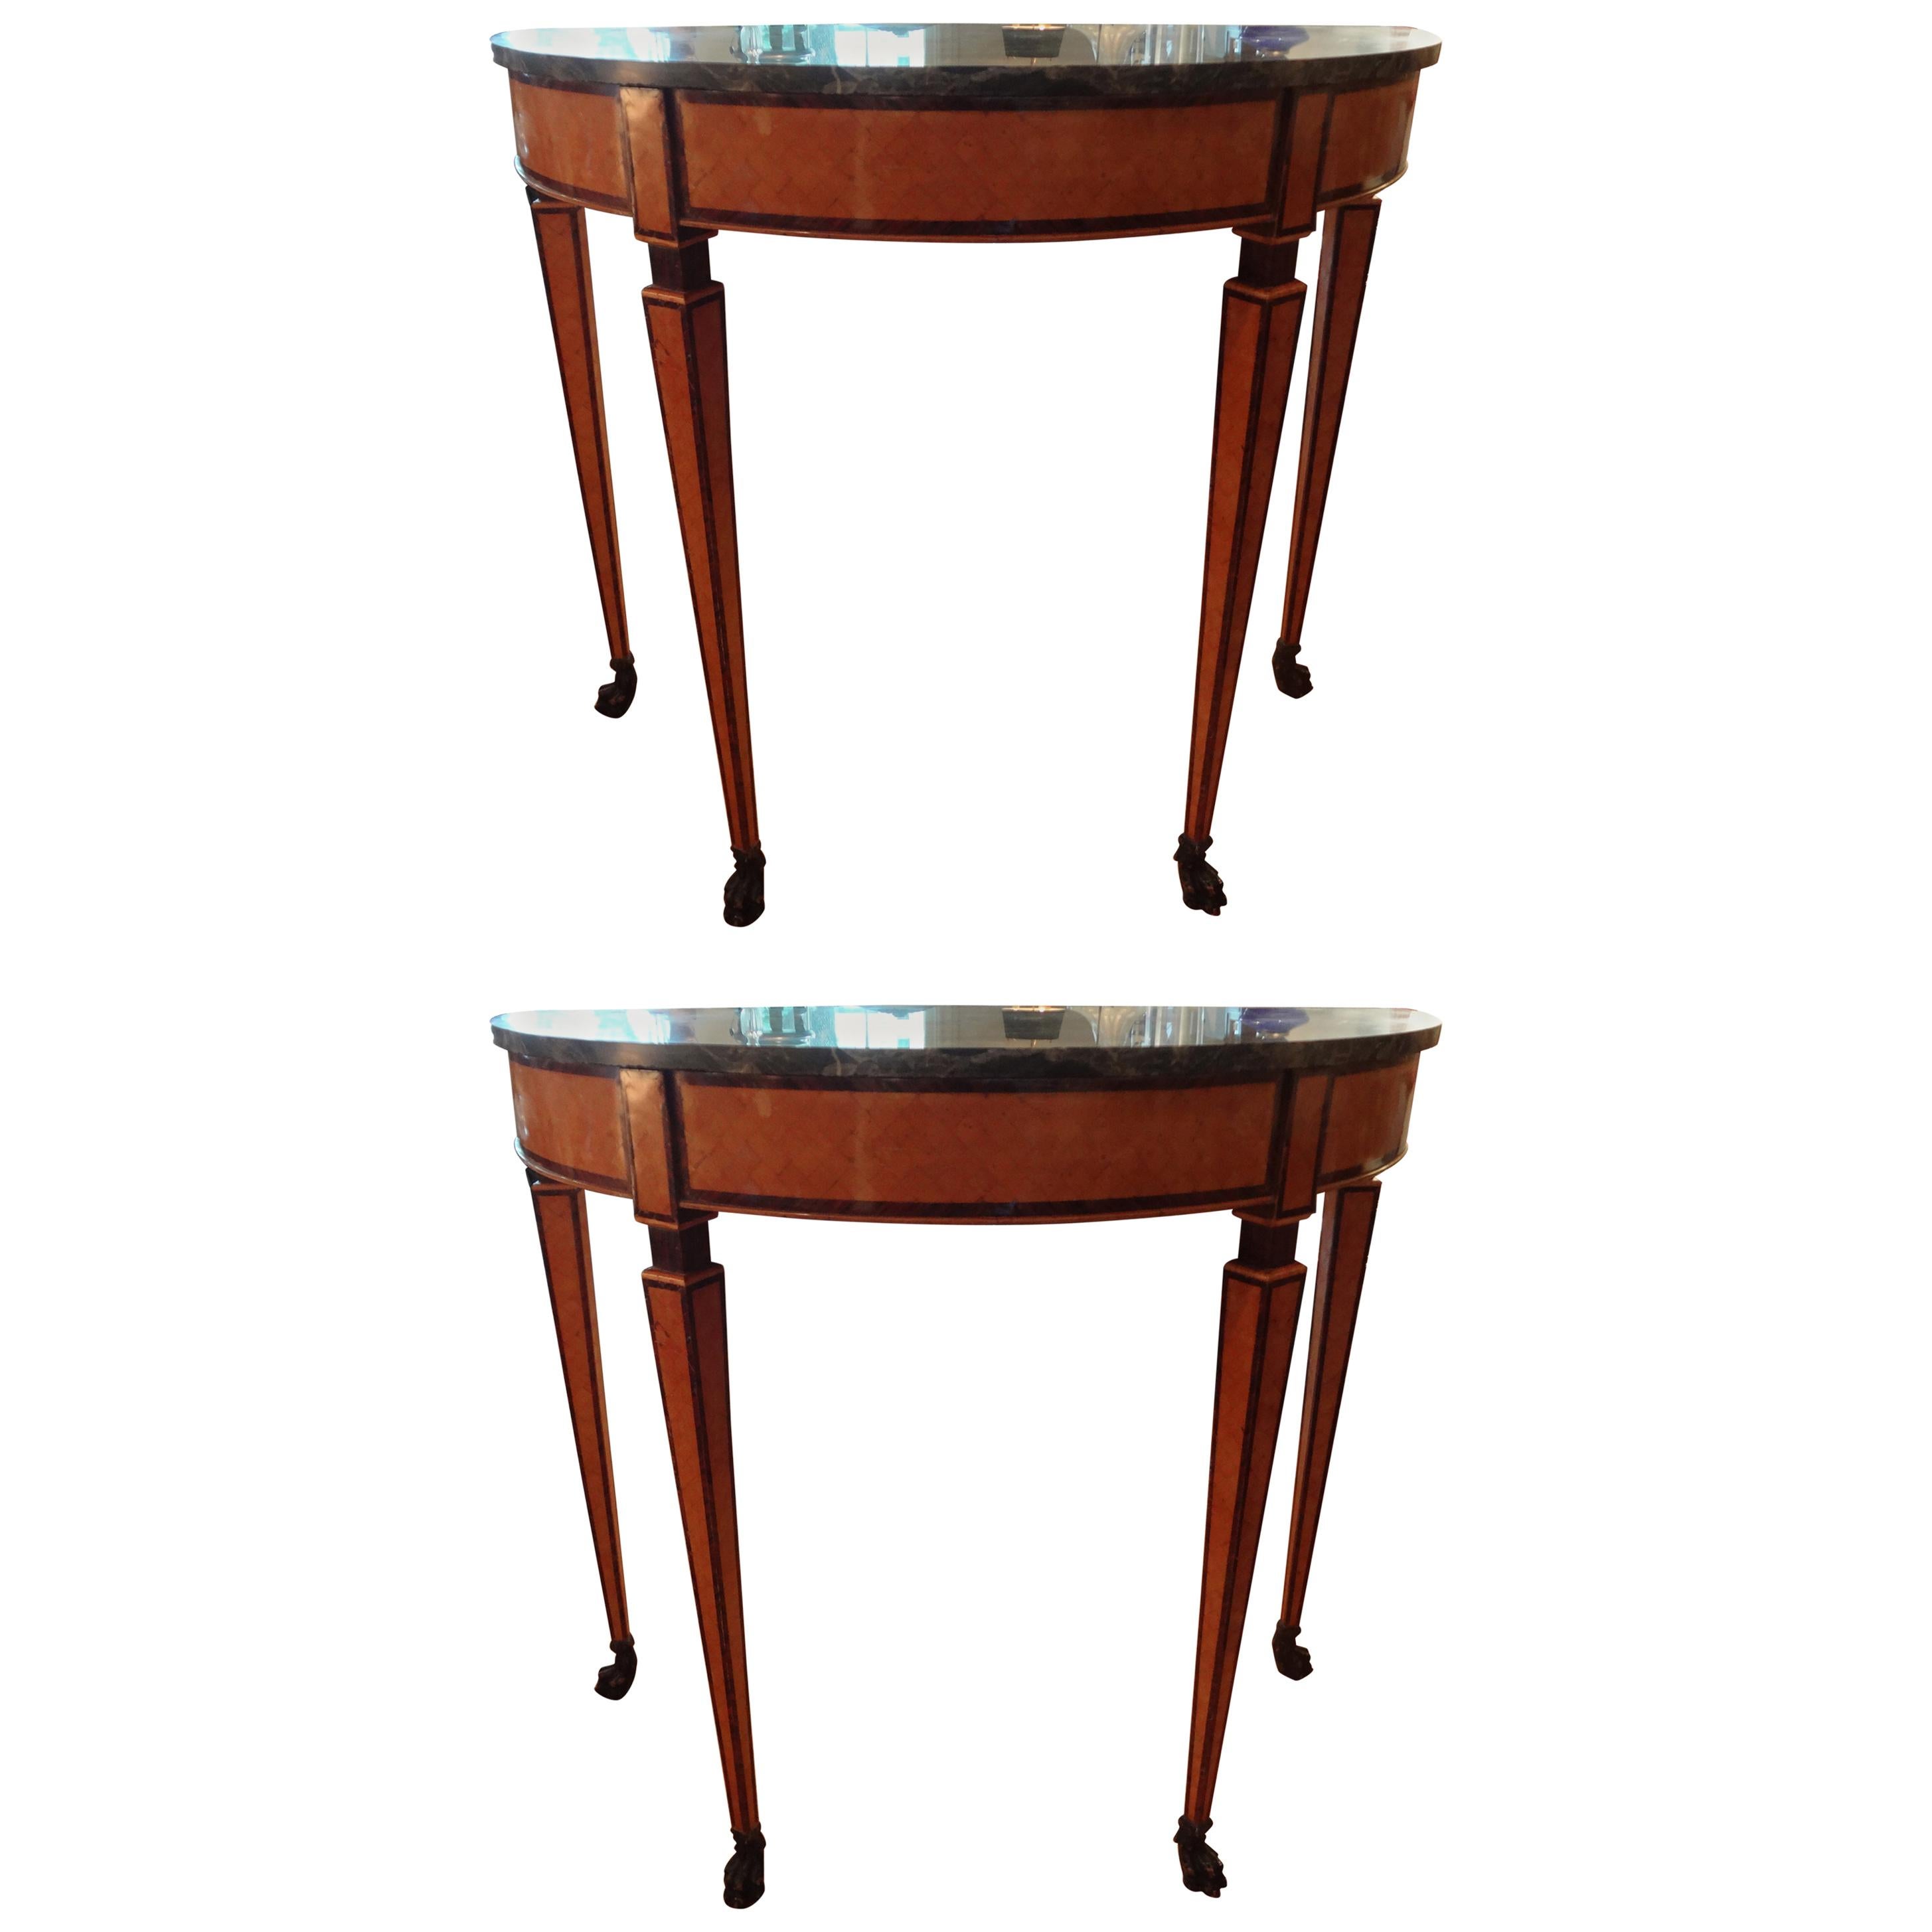 Matching pair of 19th century Italian Neoclassical style parquetry console tables. This pair of Antique Italian demilune tables have a beautiful fruitwood geometric inlaid design with paw feet and marble tops.